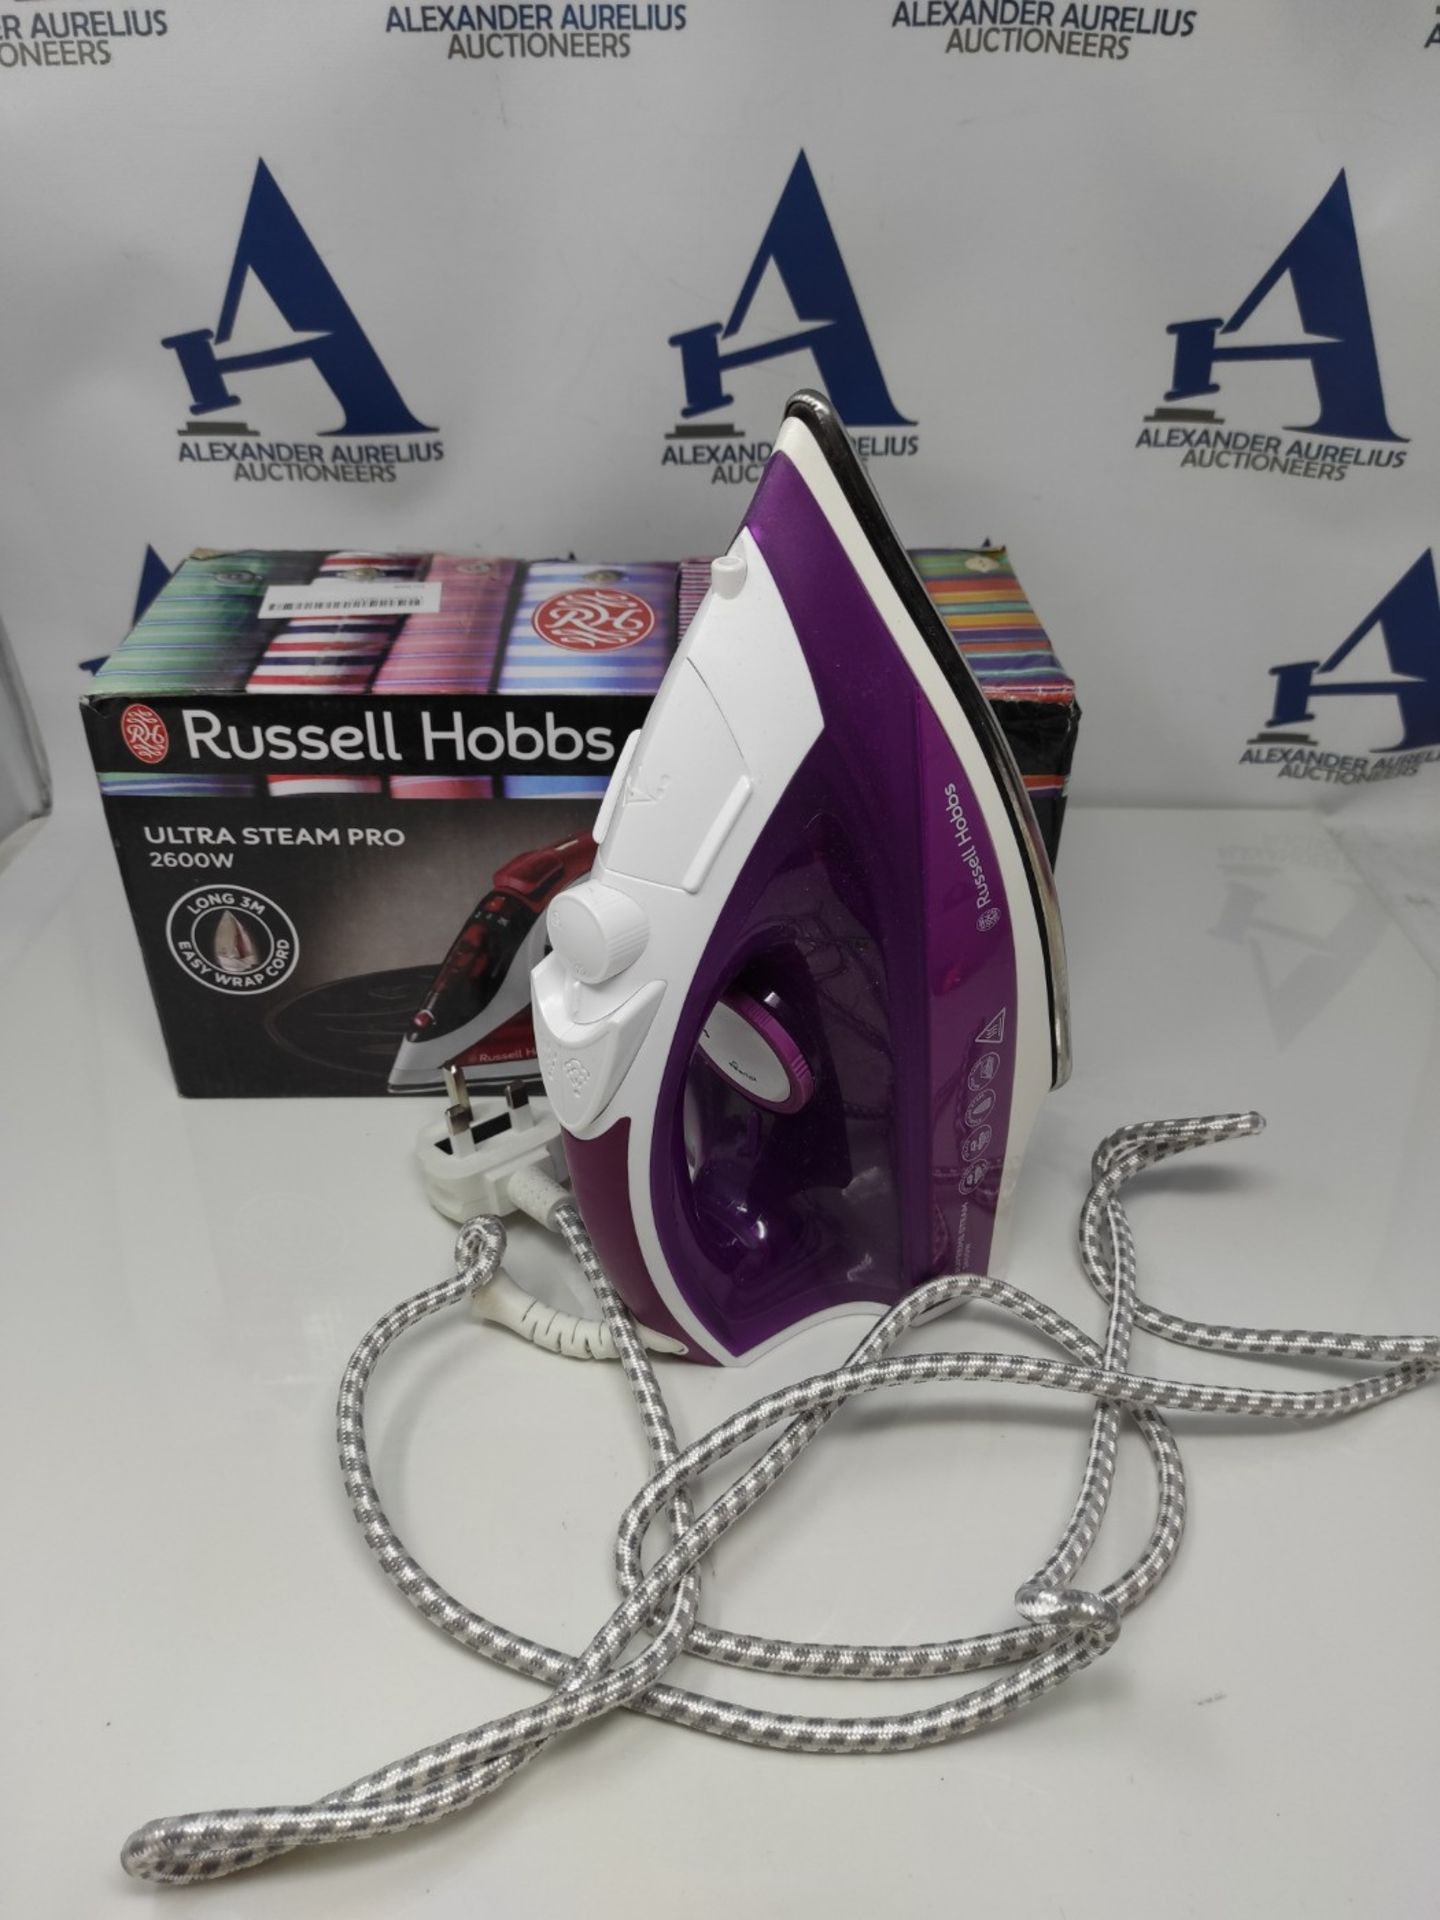 Russell Hobbs Supreme Steam Iron, Powerful vertical steam function, Non-stick stainles - Image 3 of 3